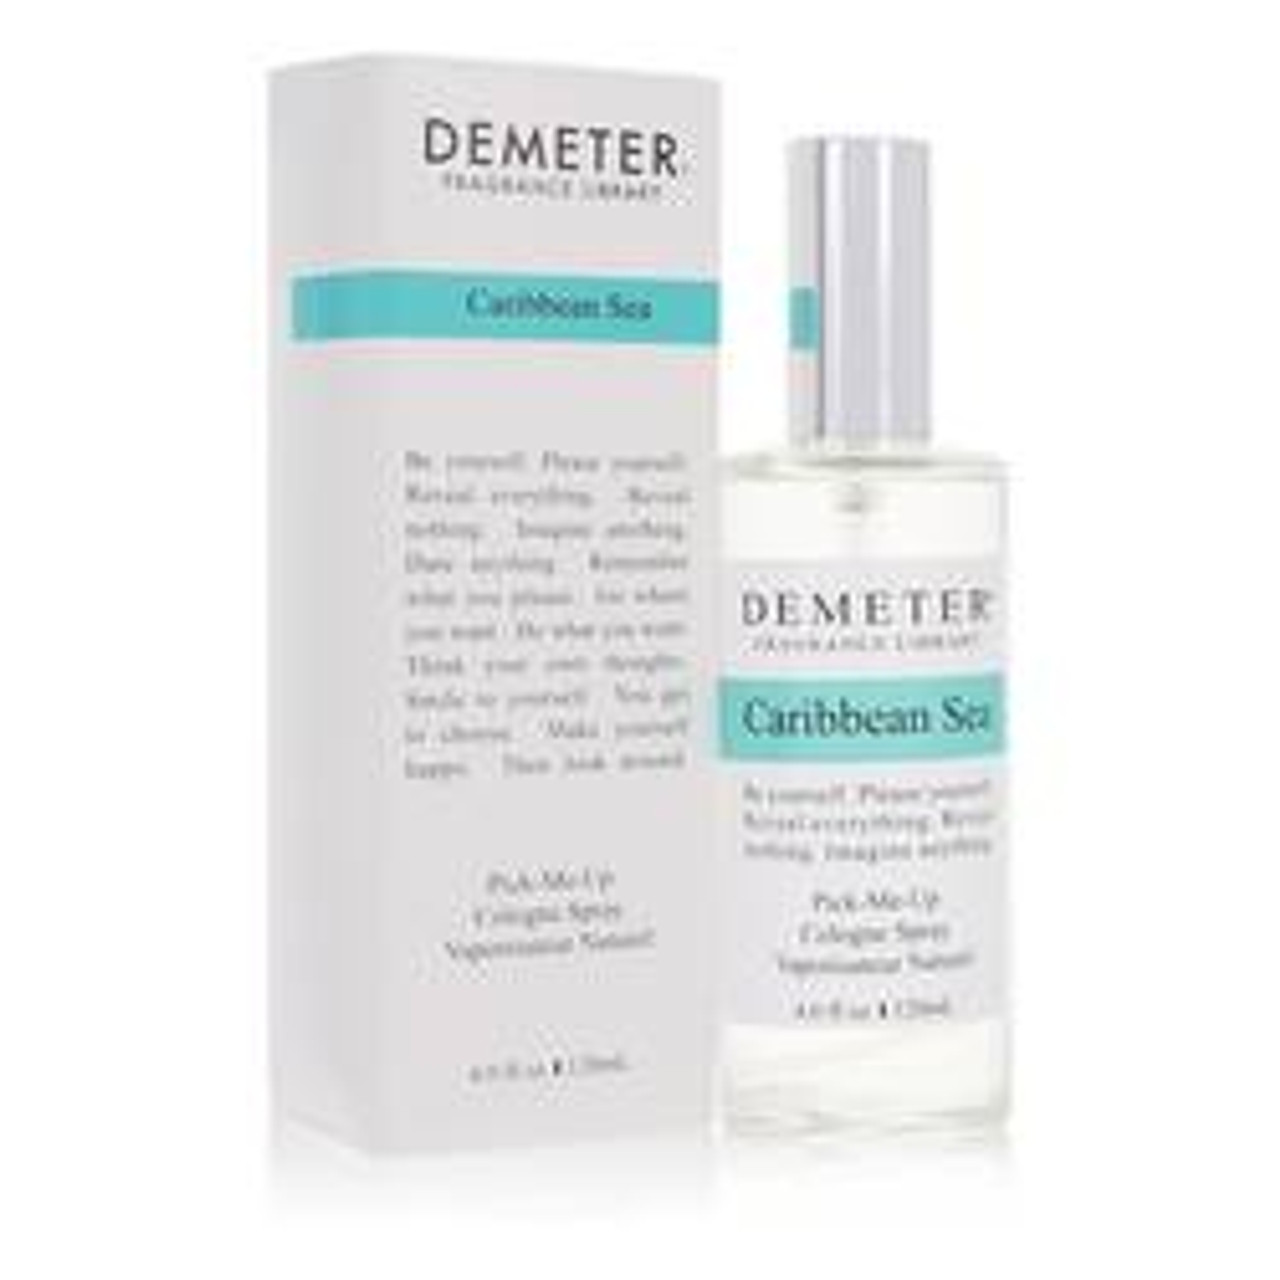 Demeter Caribbean Sea Perfume By Demeter Cologne Spray 4 oz for Women - [From 79.50 - Choose pk Qty ] - *Ships from Miami